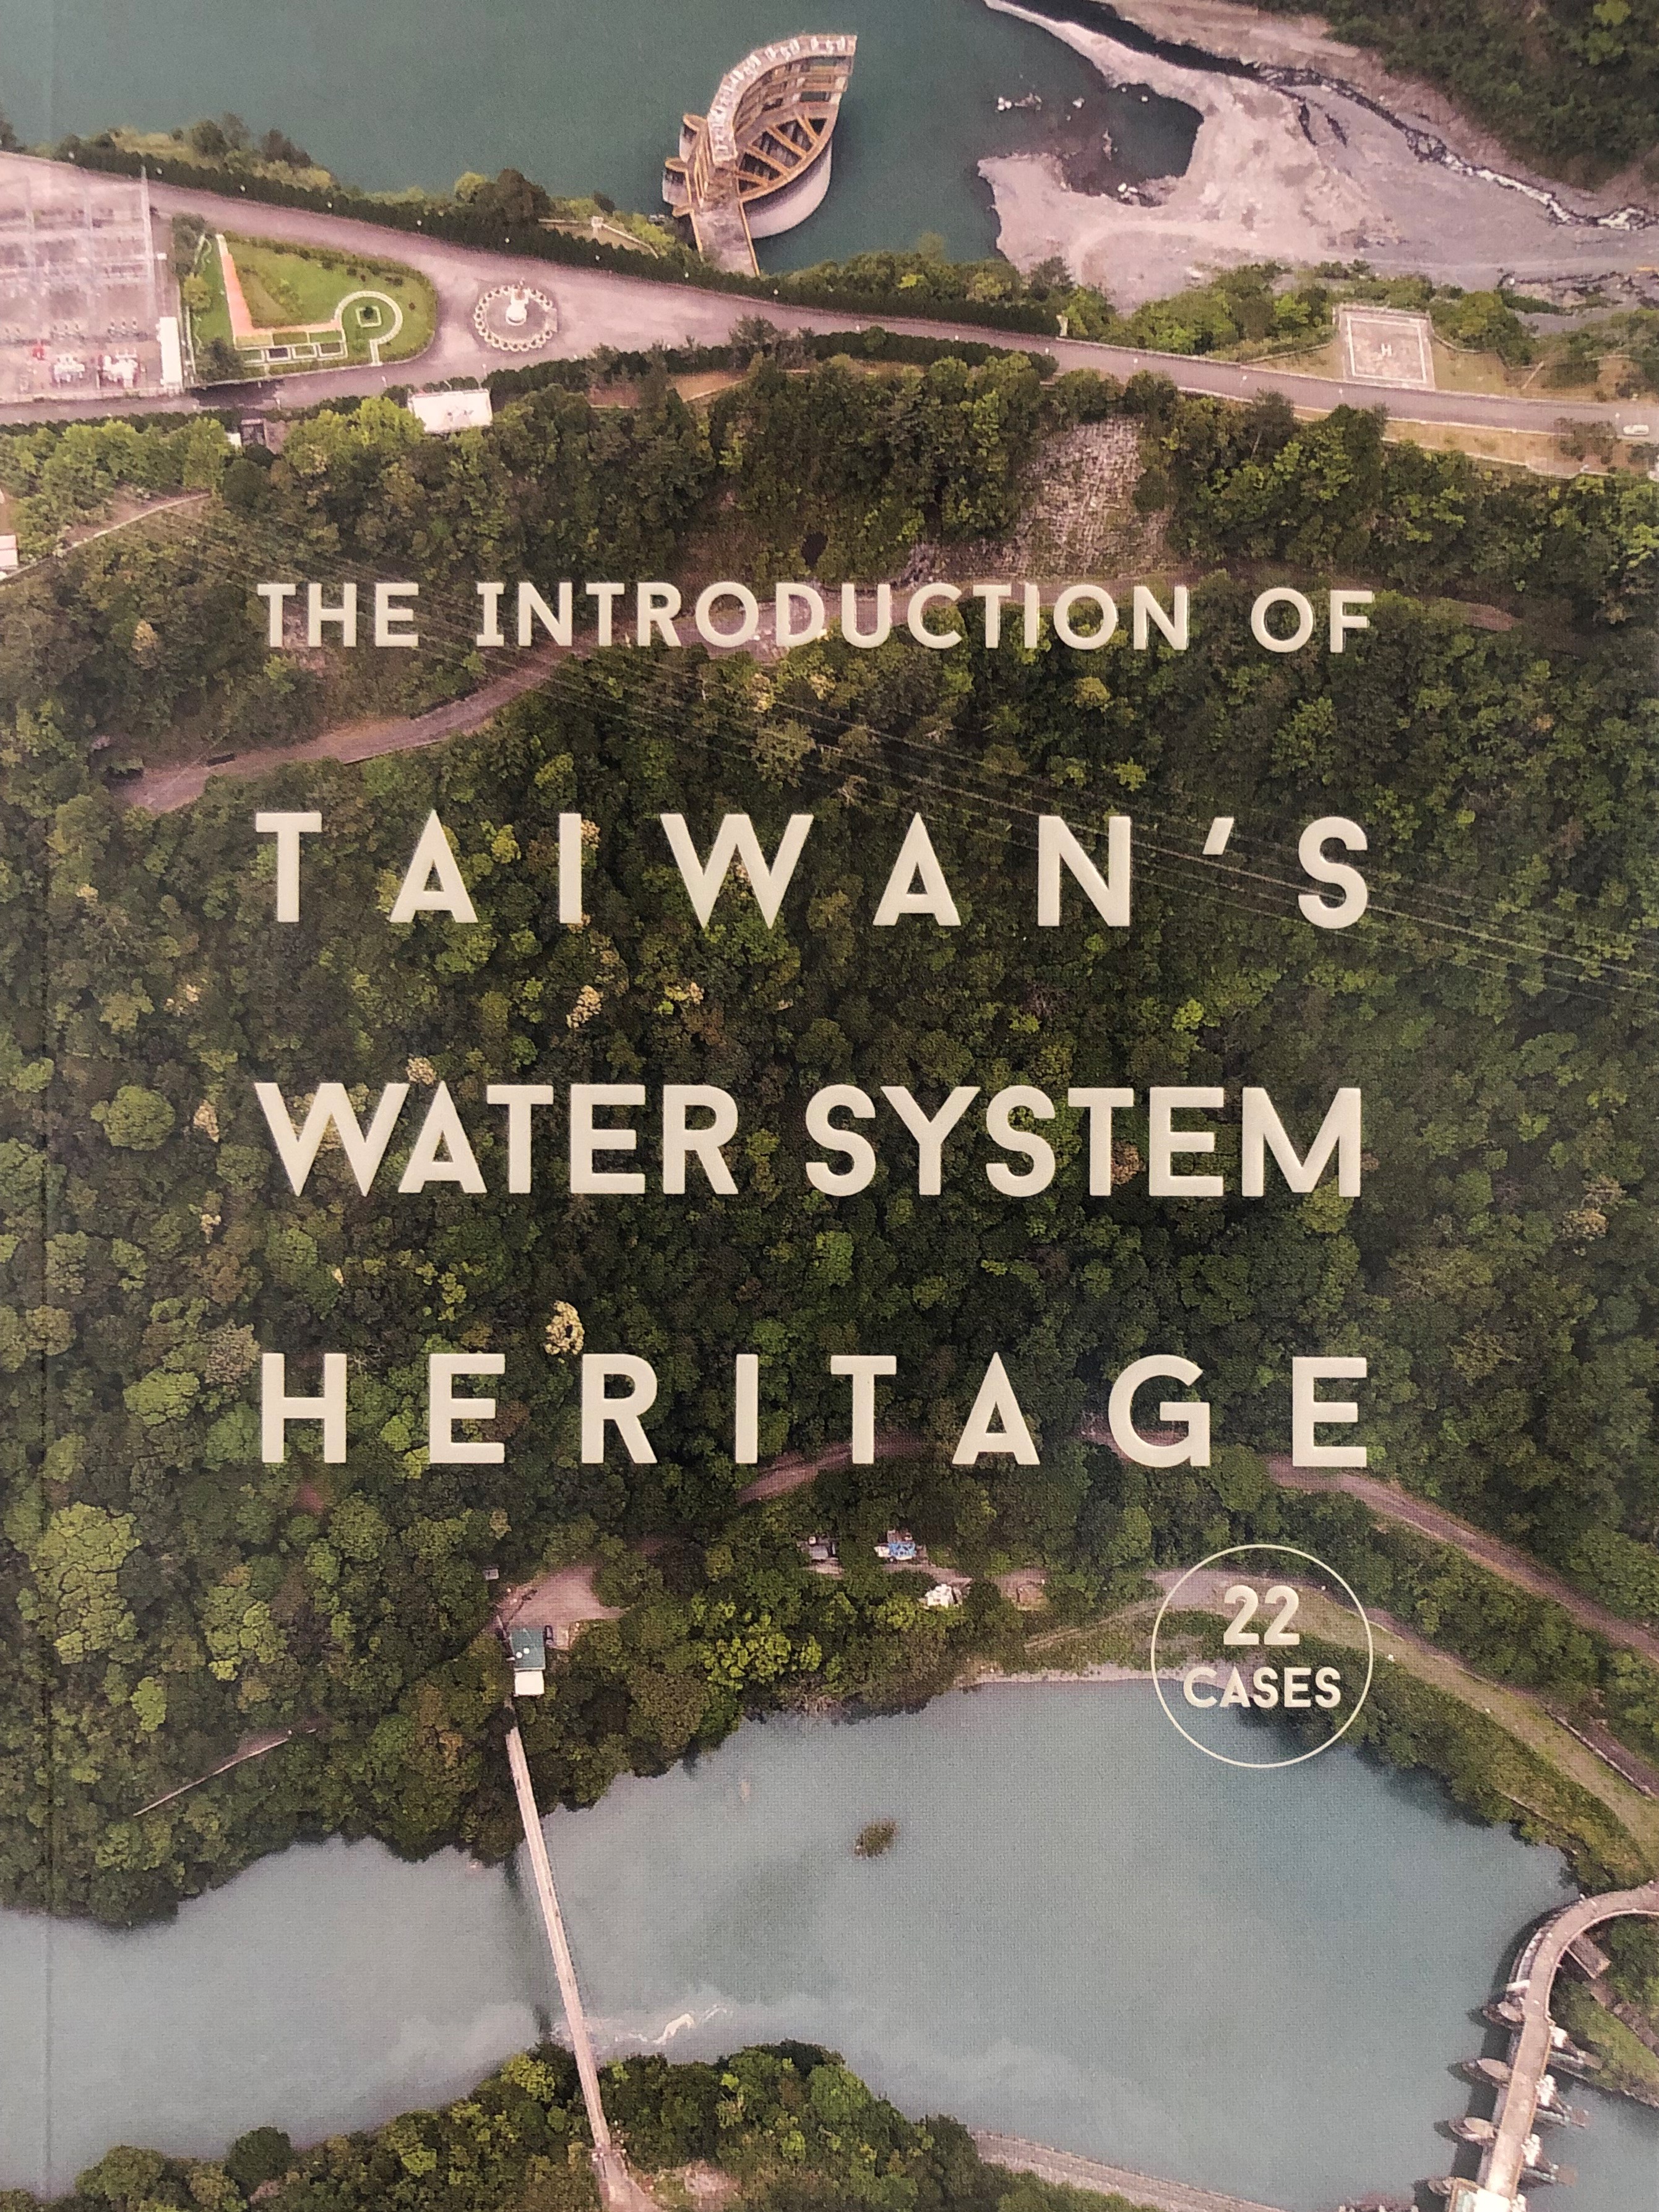 The Introduction of Taiwan's Water System Heritage